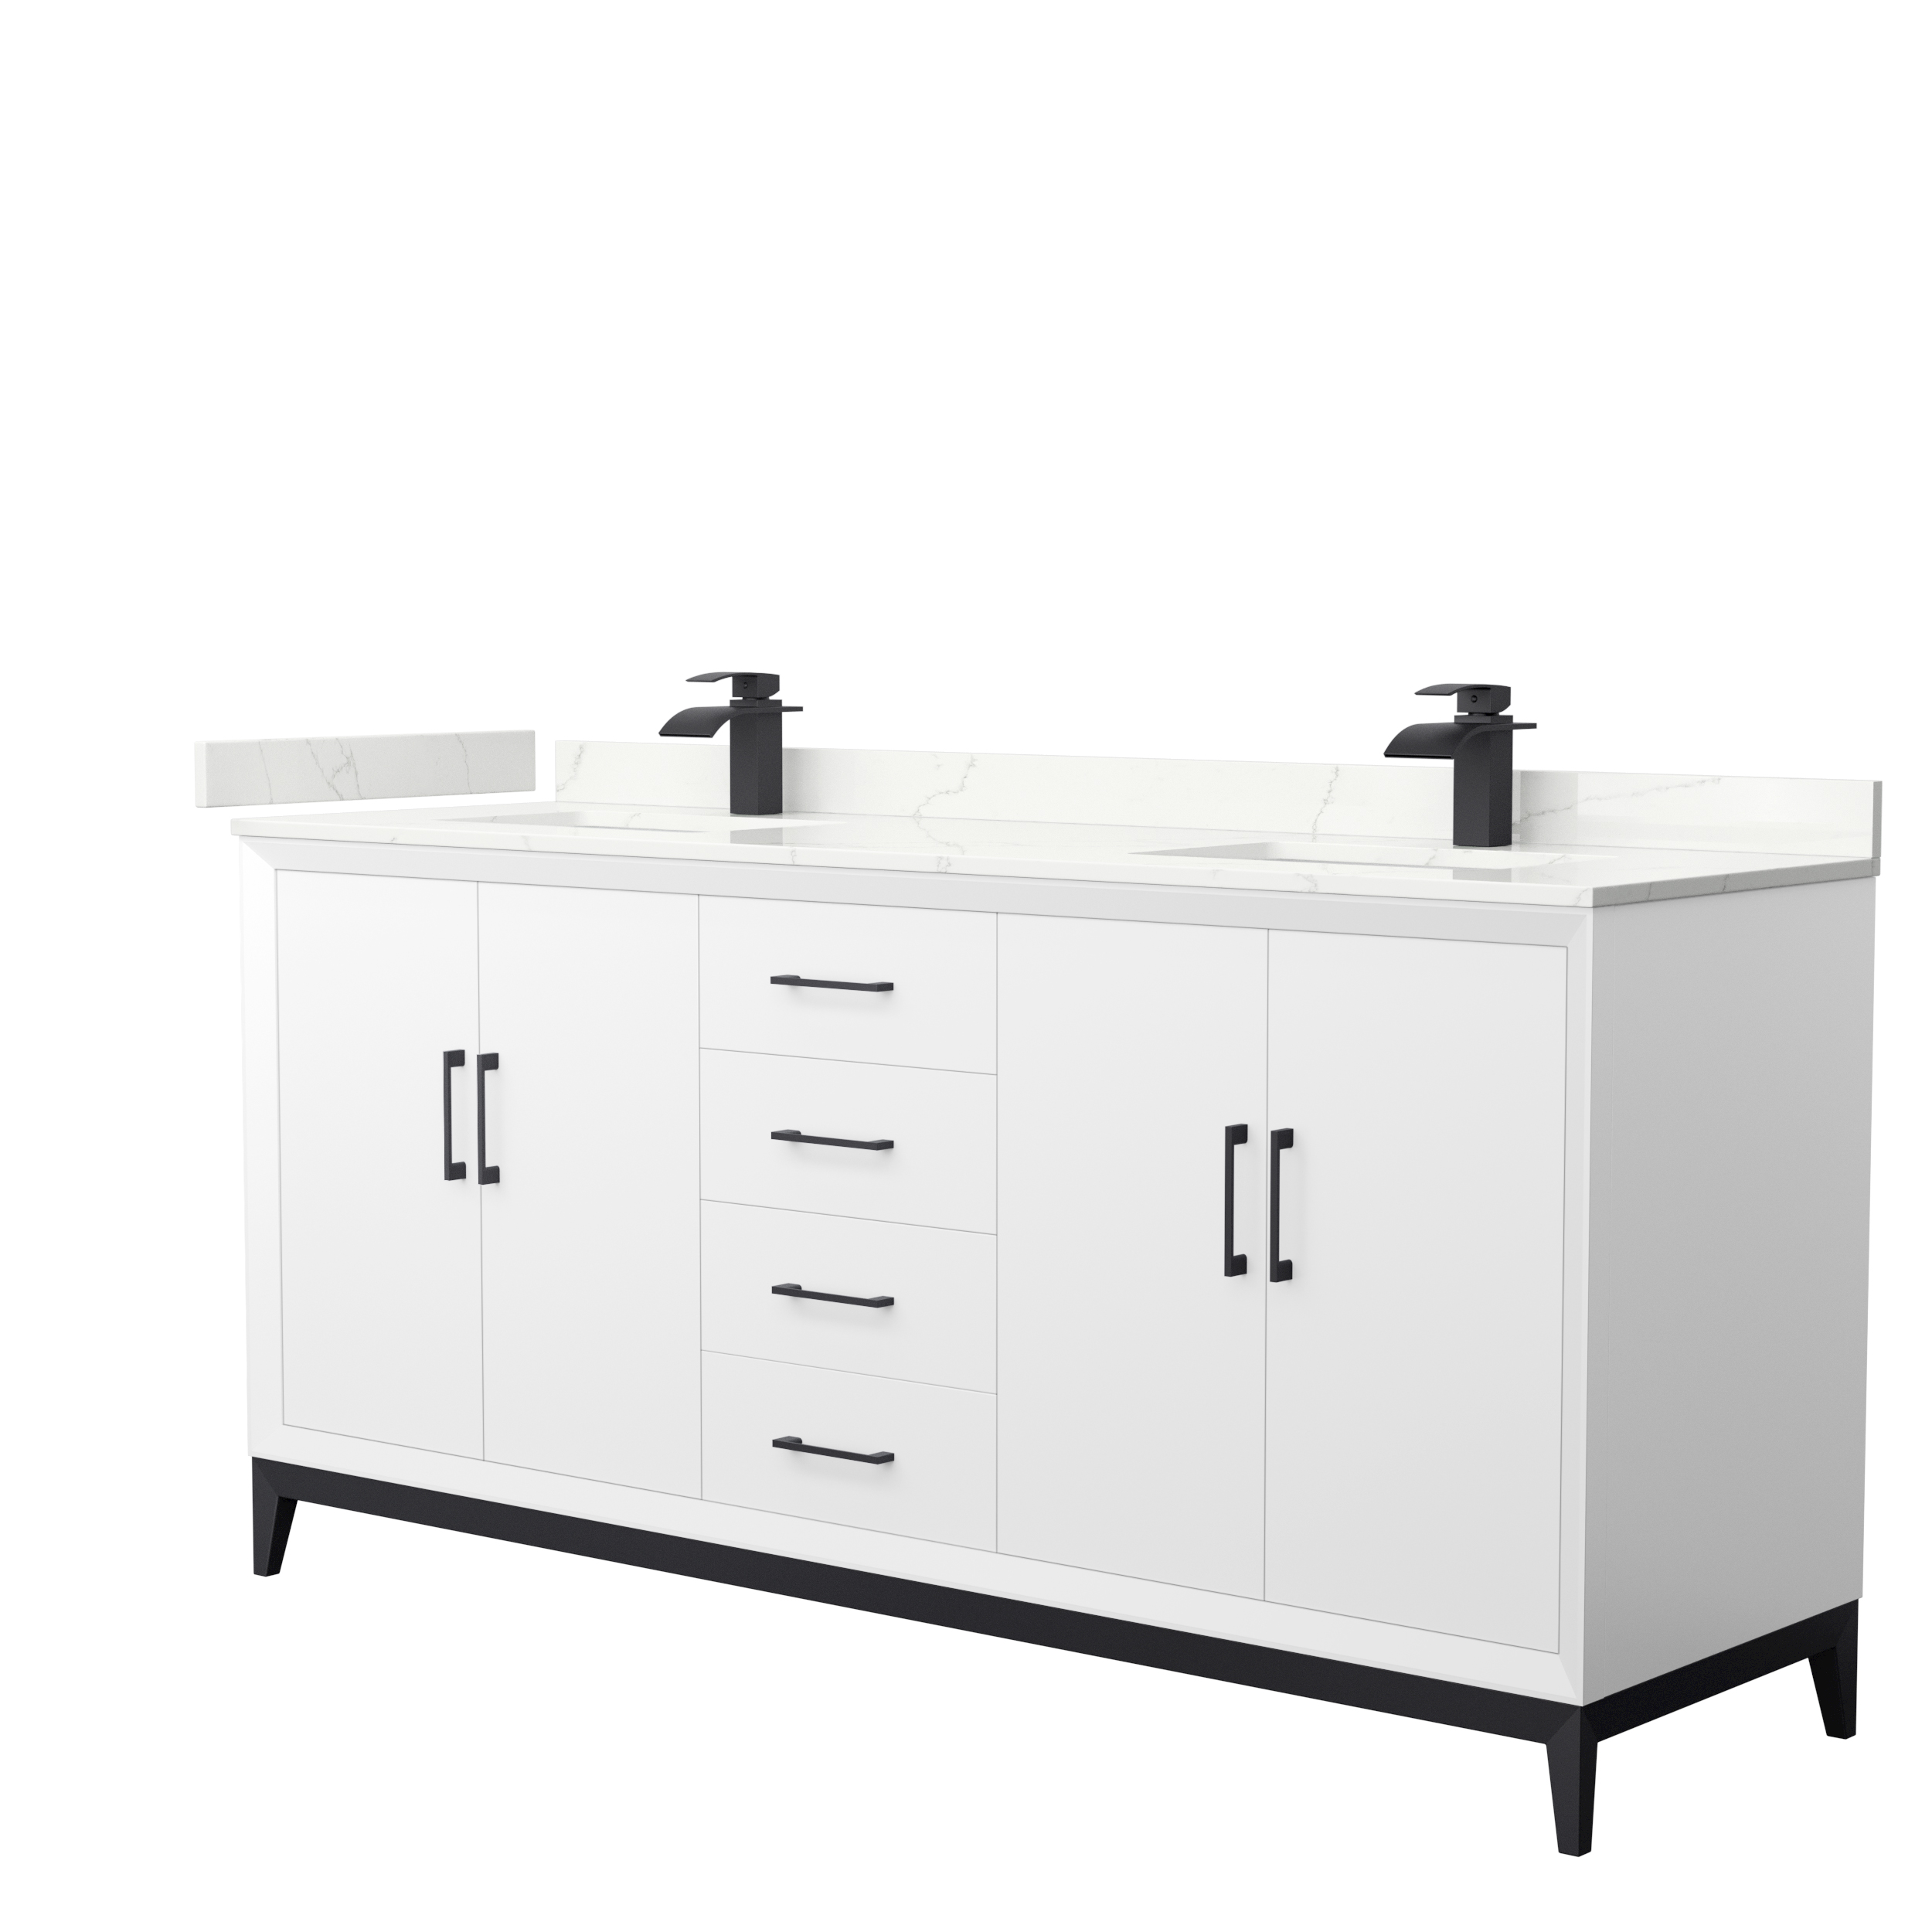 Amici 72" Double Vanity with optional Quartz or Carrara Marble Counter - White WC-8181-72-DBL-VAN-WHT_